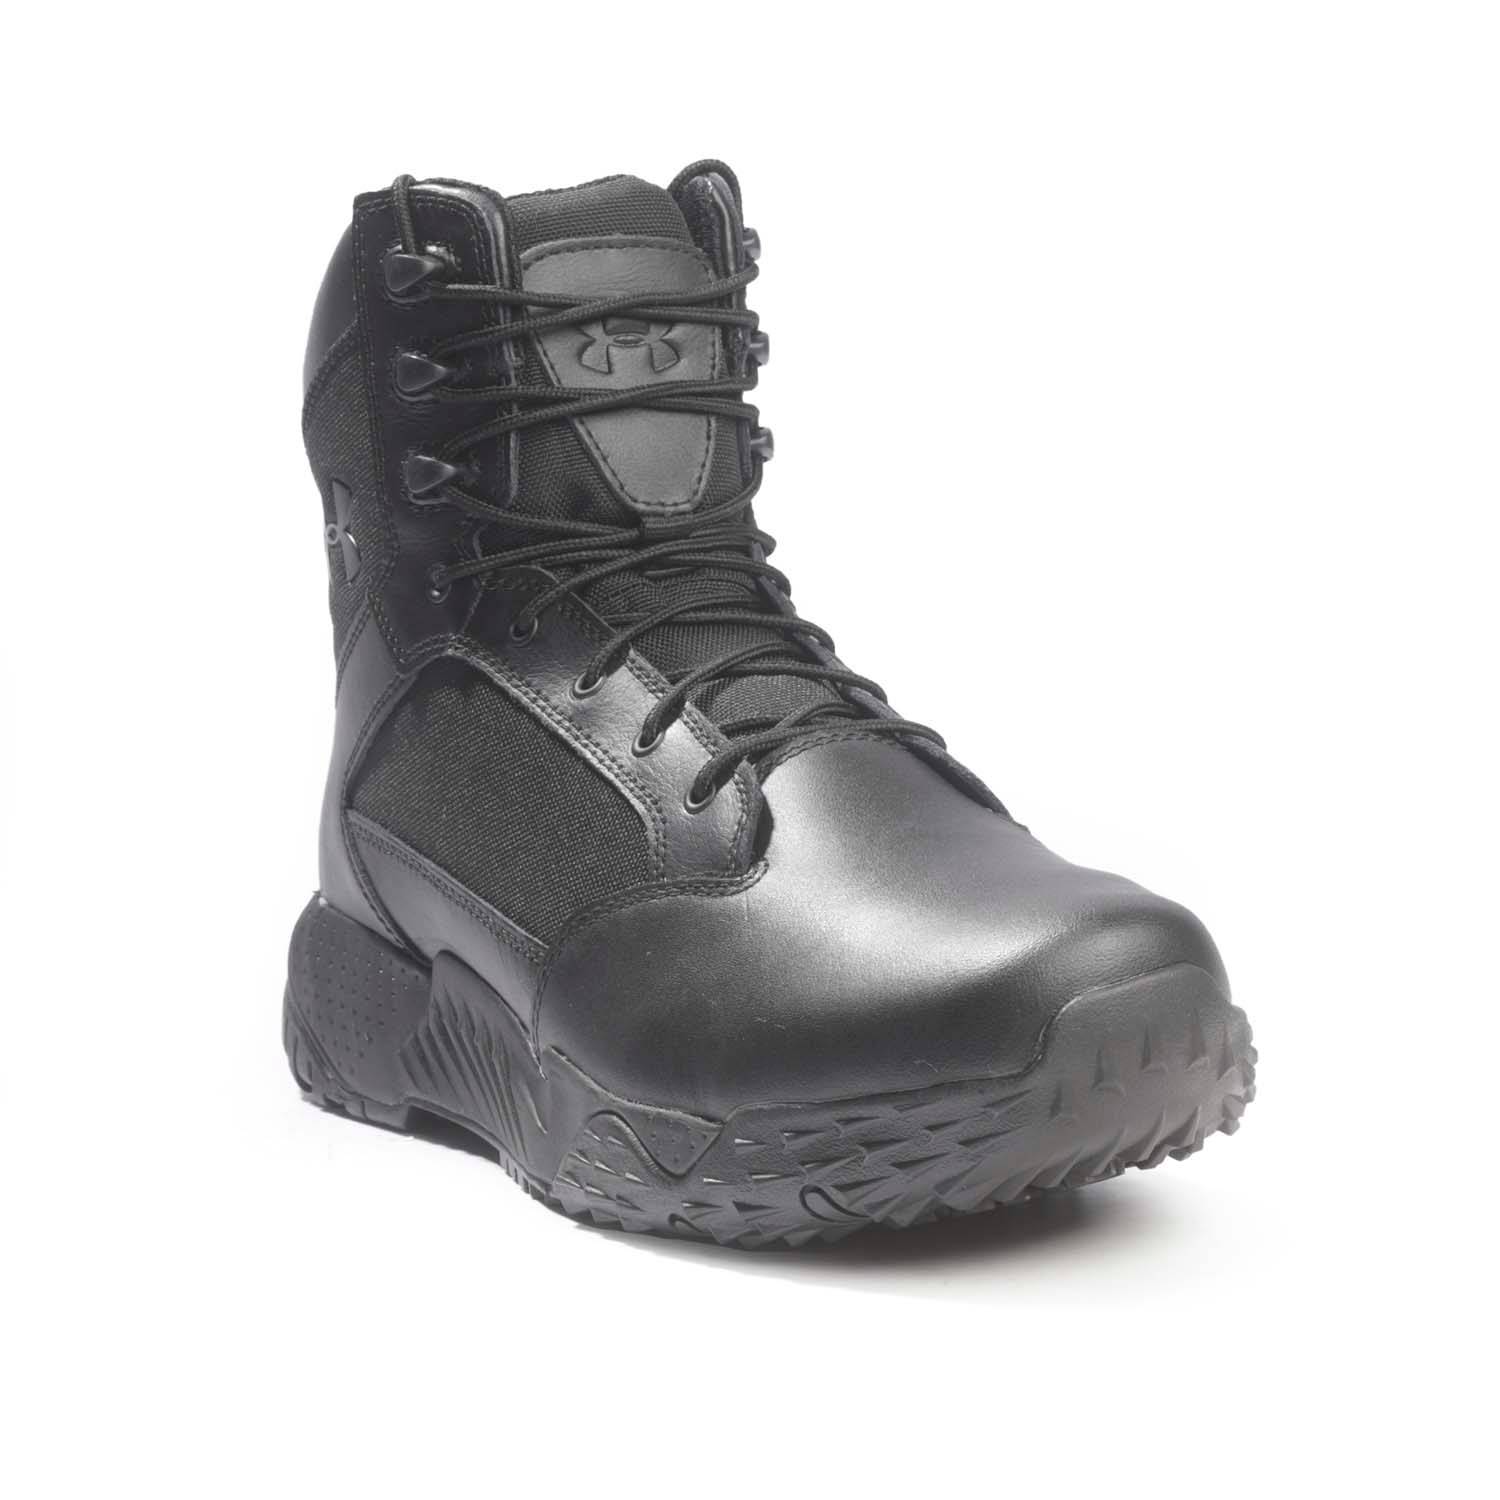 Under Armour 8" Stellar Tactical Side-Zip Boots